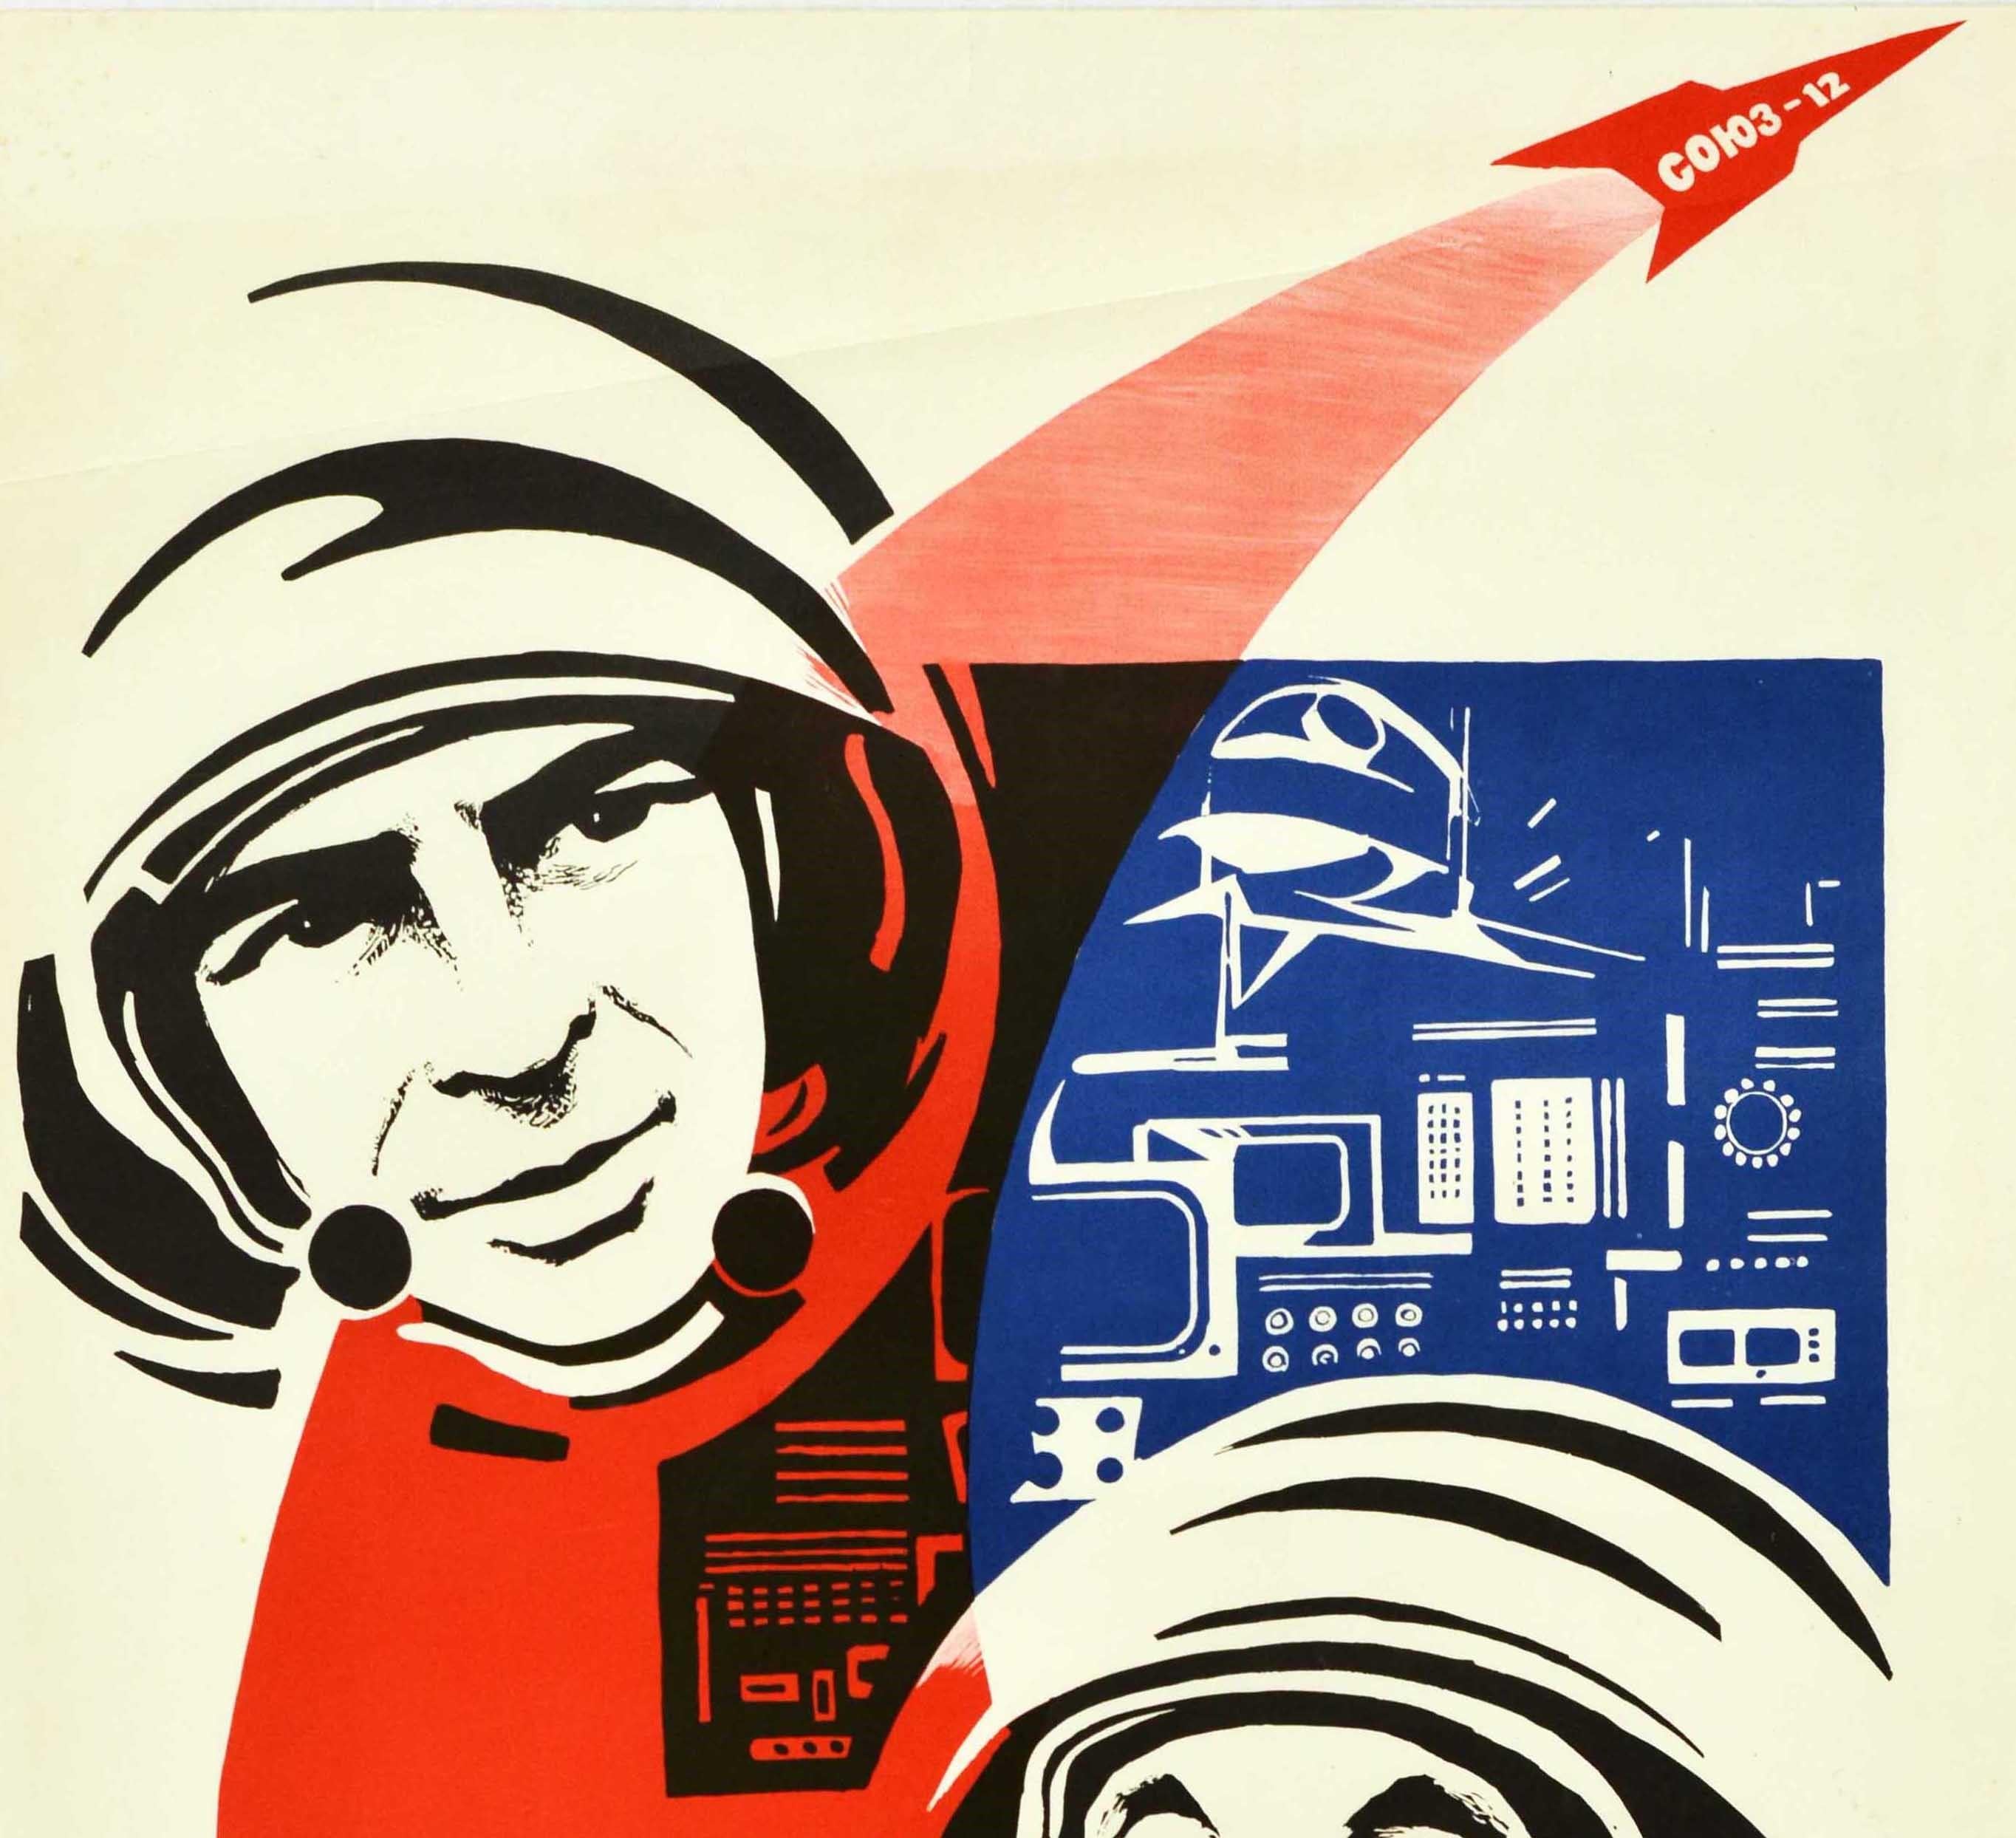 Original vintage Soviet space propaganda poster - Glory to the workers of space! - featuring a black and white illustration of two cosmonauts, Vasily Lazarev (1928-1990) and Oleg Makarov (1933-2003), with a red Soyuz-12 rocket leaving a shooting red